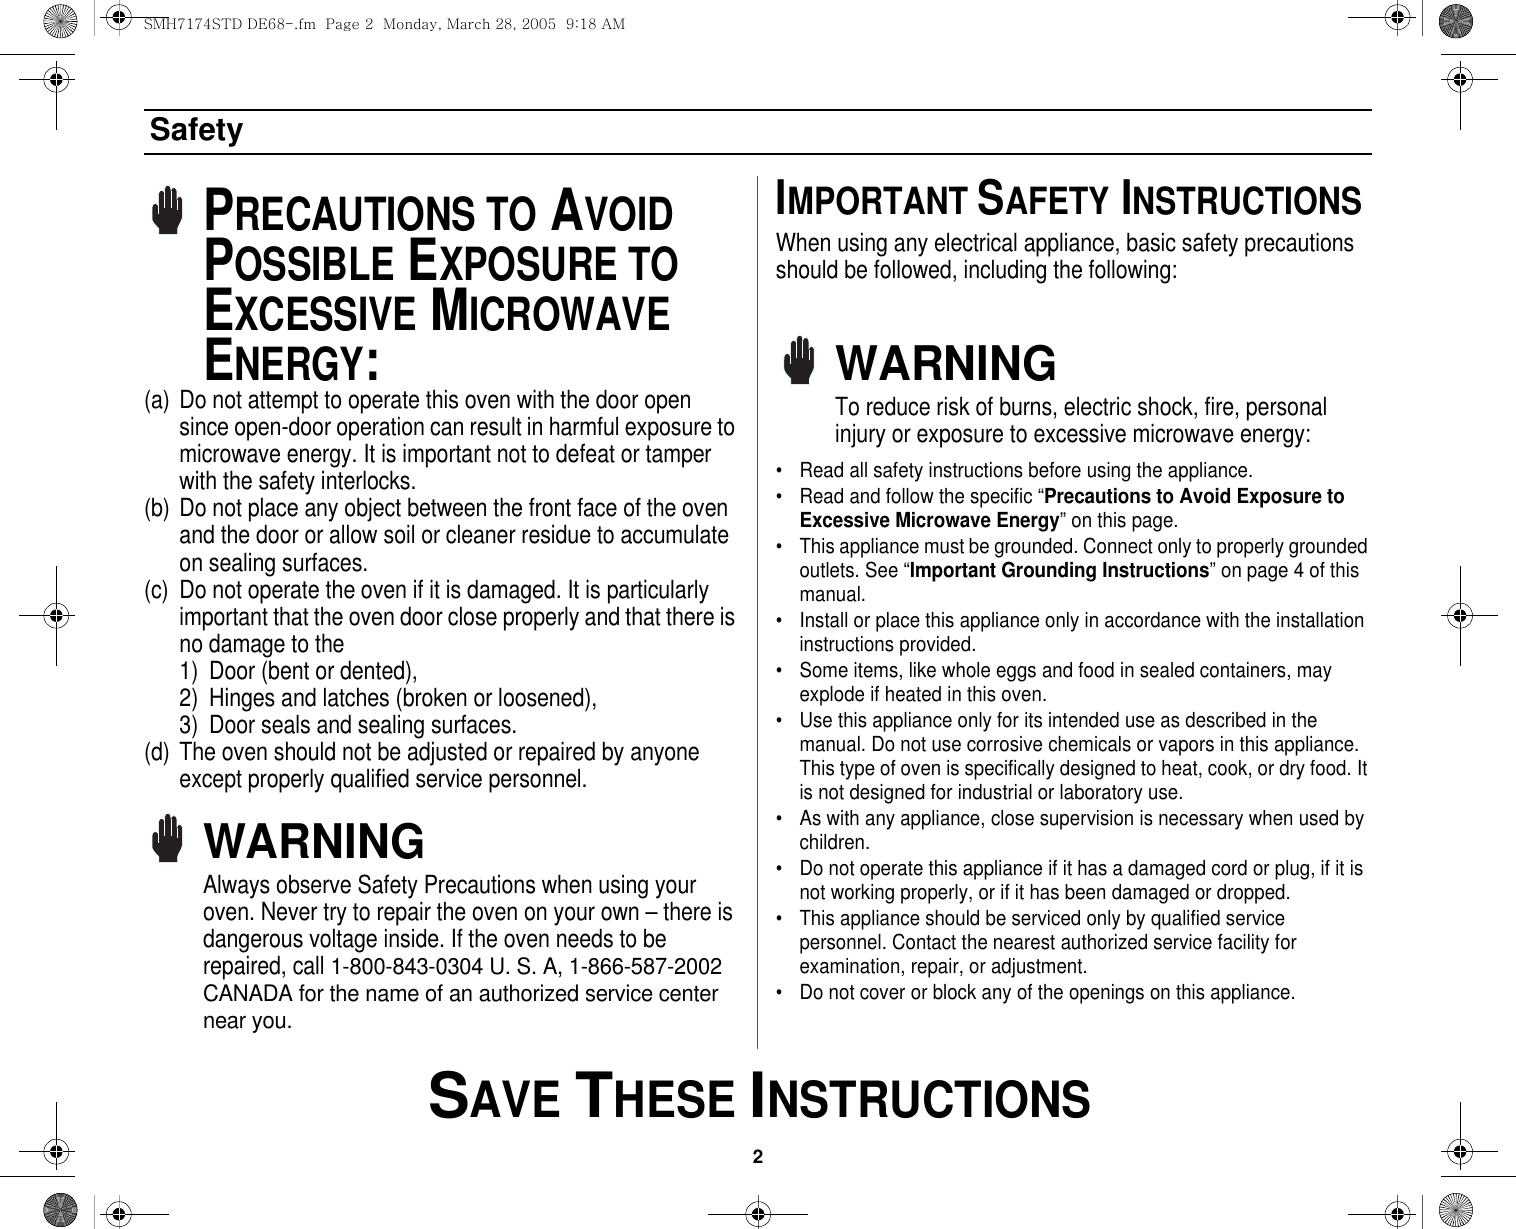 2 SAVE THESE INSTRUCTIONSSafetyPRECAUTIONS TO AVOID POSSIBLE EXPOSURE TO EXCESSIVE MICROWAVE ENERGY:(a) Do not attempt to operate this oven with the door open since open-door operation can result in harmful exposure to microwave energy. It is important not to defeat or tamper with the safety interlocks.(b) Do not place any object between the front face of the oven and the door or allow soil or cleaner residue to accumulate on sealing surfaces.(c) Do not operate the oven if it is damaged. It is particularly important that the oven door close properly and that there is no damage to the 1) Door (bent or dented), 2) Hinges and latches (broken or loosened), 3) Door seals and sealing surfaces.(d) The oven should not be adjusted or repaired by anyone except properly qualified service personnel.WARNINGAlways observe Safety Precautions when using your oven. Never try to repair the oven on your own – there is dangerous voltage inside. If the oven needs to be repaired, call 1-800-843-0304 U. S. A, 1-866-587-2002 CANADA for the name of an authorized service center near you.IMPORTANT SAFETY INSTRUCTIONSWhen using any electrical appliance, basic safety precautions should be followed, including the following:WARNINGTo reduce risk of burns, electric shock, fire, personal injury or exposure to excessive microwave energy:• Read all safety instructions before using the appliance.• Read and follow the specific “Precautions to Avoid Exposure to Excessive Microwave Energy” on this page.• This appliance must be grounded. Connect only to properly grounded outlets. See “Important Grounding Instructions” on page 4 of this manual. • Install or place this appliance only in accordance with the installation instructions provided.• Some items, like whole eggs and food in sealed containers, may explode if heated in this oven.• Use this appliance only for its intended use as described in the manual. Do not use corrosive chemicals or vapors in this appliance. This type of oven is specifically designed to heat, cook, or dry food. It is not designed for industrial or laboratory use.• As with any appliance, close supervision is necessary when used by children.• Do not operate this appliance if it has a damaged cord or plug, if it is not working properly, or if it has been damaged or dropped.• This appliance should be serviced only by qualified service personnel. Contact the nearest authorized service facility for examination, repair, or adjustment.• Do not cover or block any of the openings on this appliance.SMH7174STD DE68-.fm  Page 2  Monday, March 28, 2005  9:18 AM